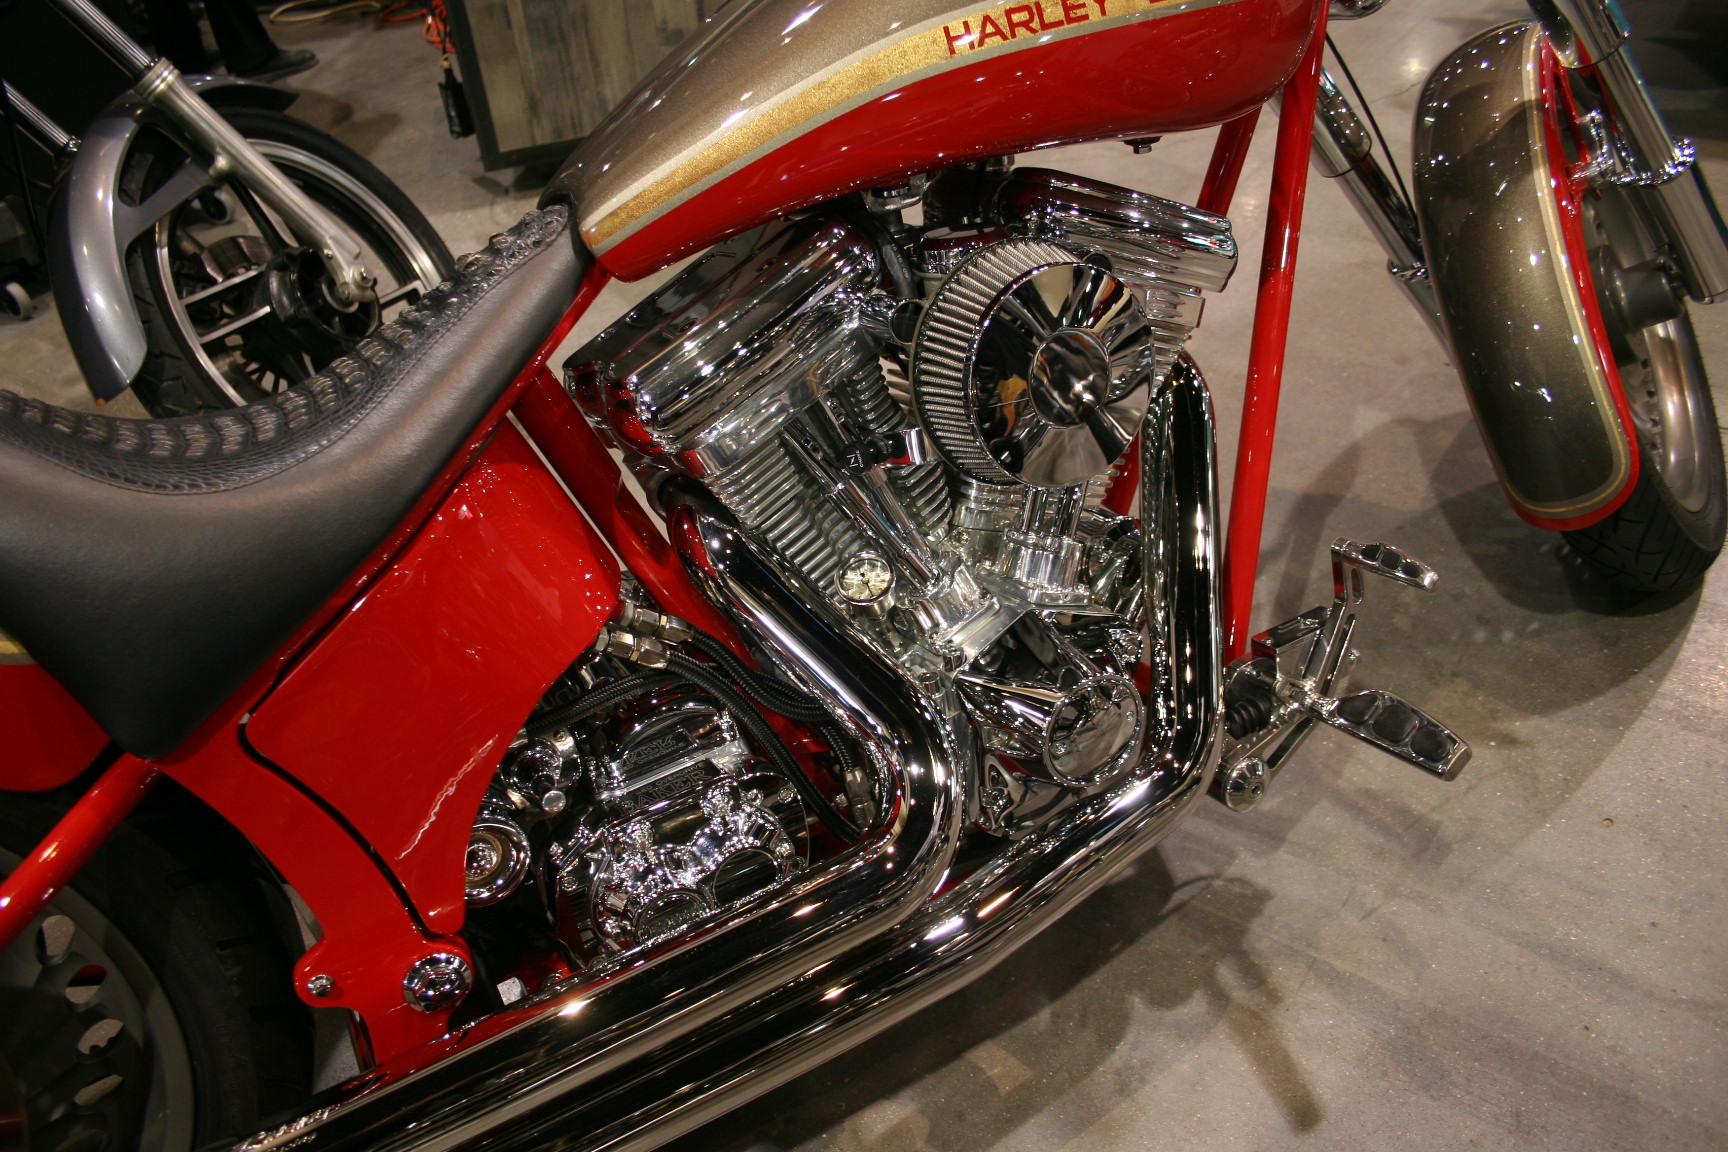 3rd Image of a 2001 HARLEY MOTORCYCLE